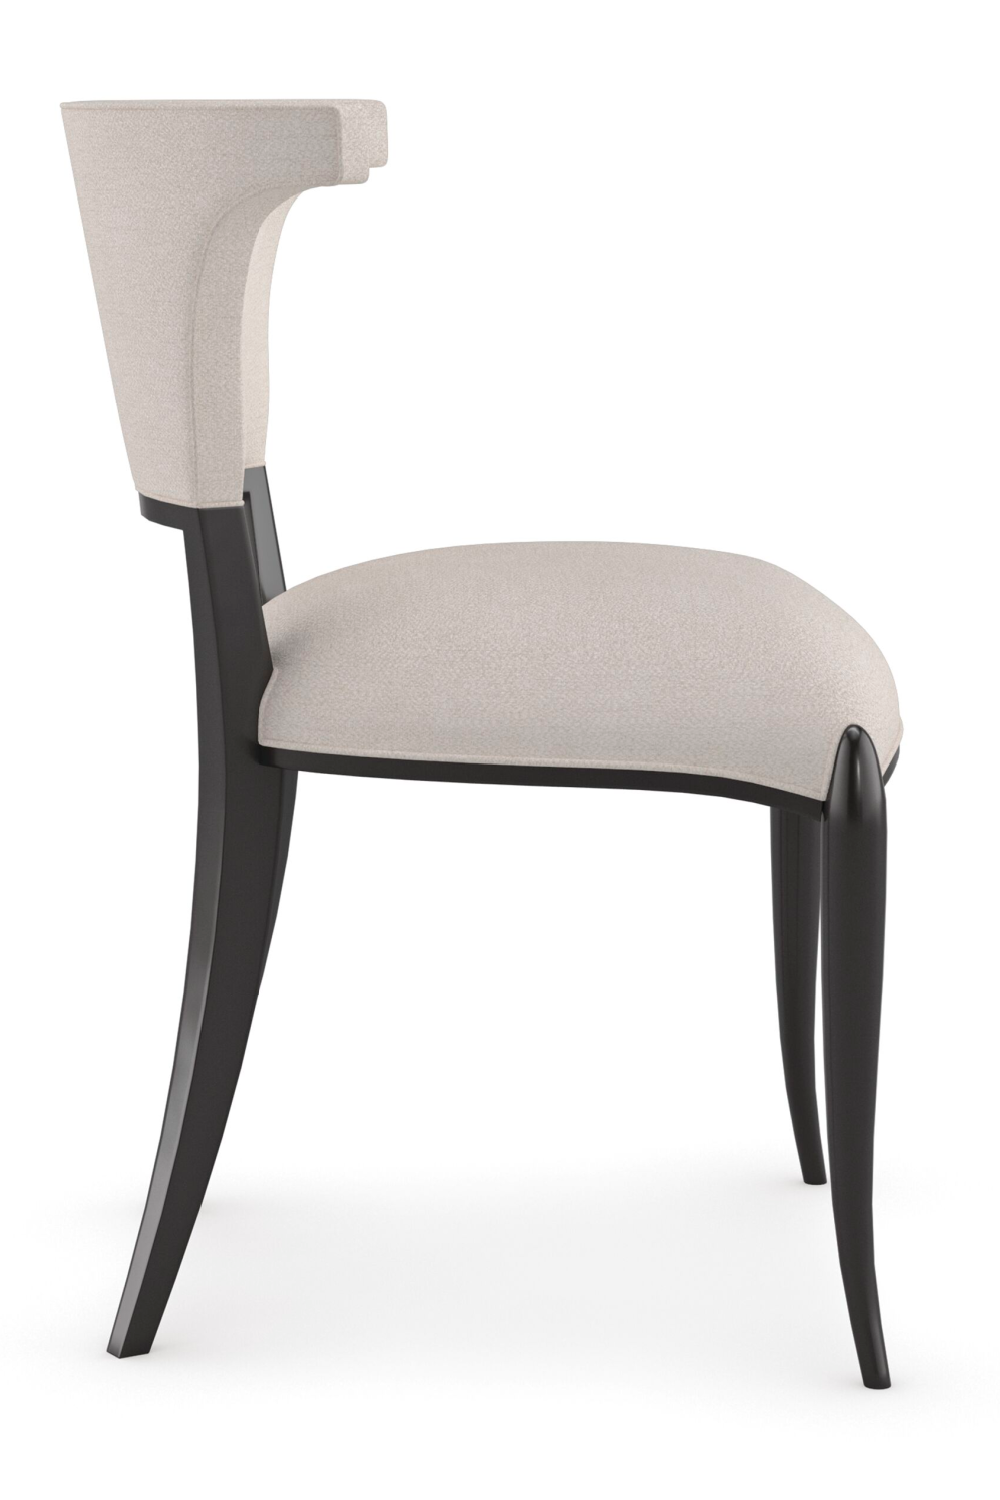 Modern Winged Dining Chairs | Caracole Be My Guest | Oroa.com